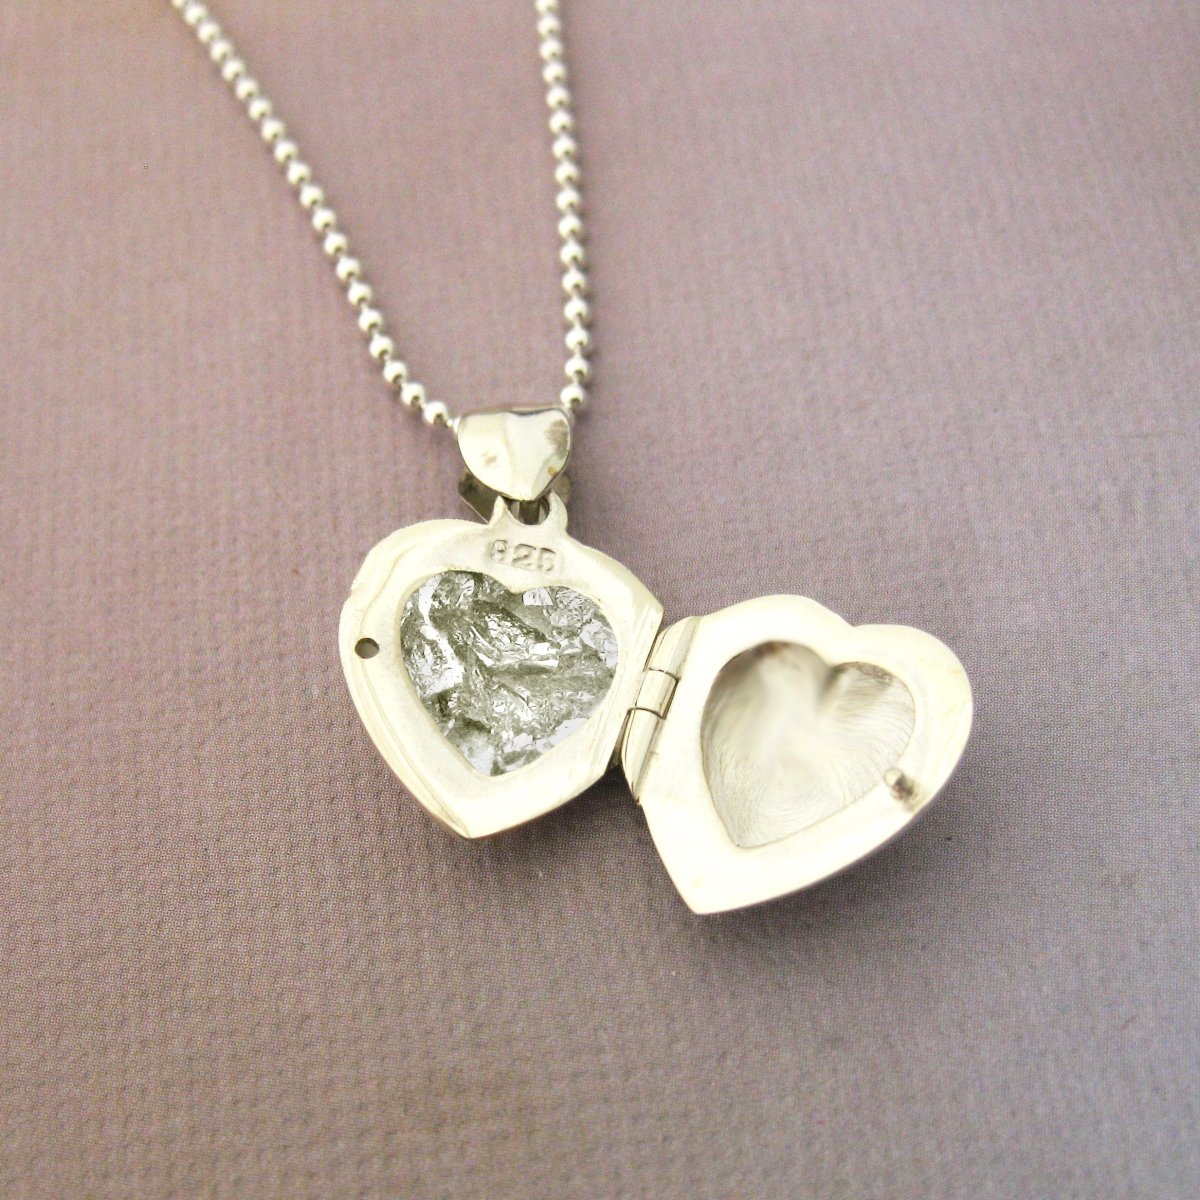 Add Ashes, A Lock of Hair, Fur, or anything you would like permanently sealed in a locket. - Luxe Design Jewellery